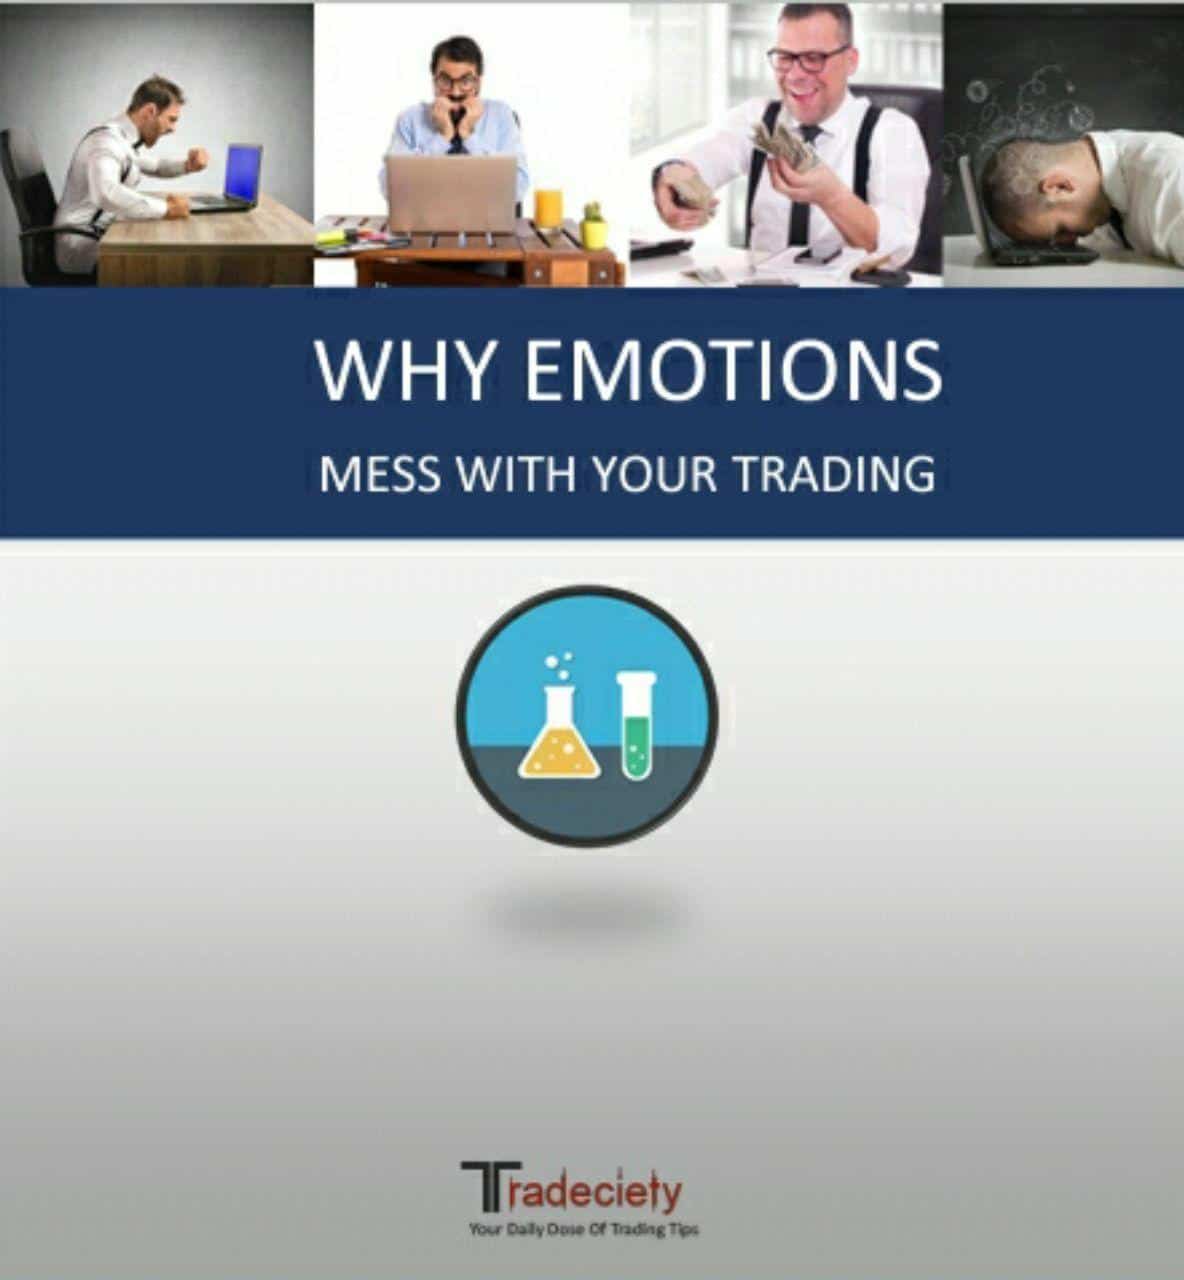 WHY EMOTIONS MESS WITH YOUR TRADING